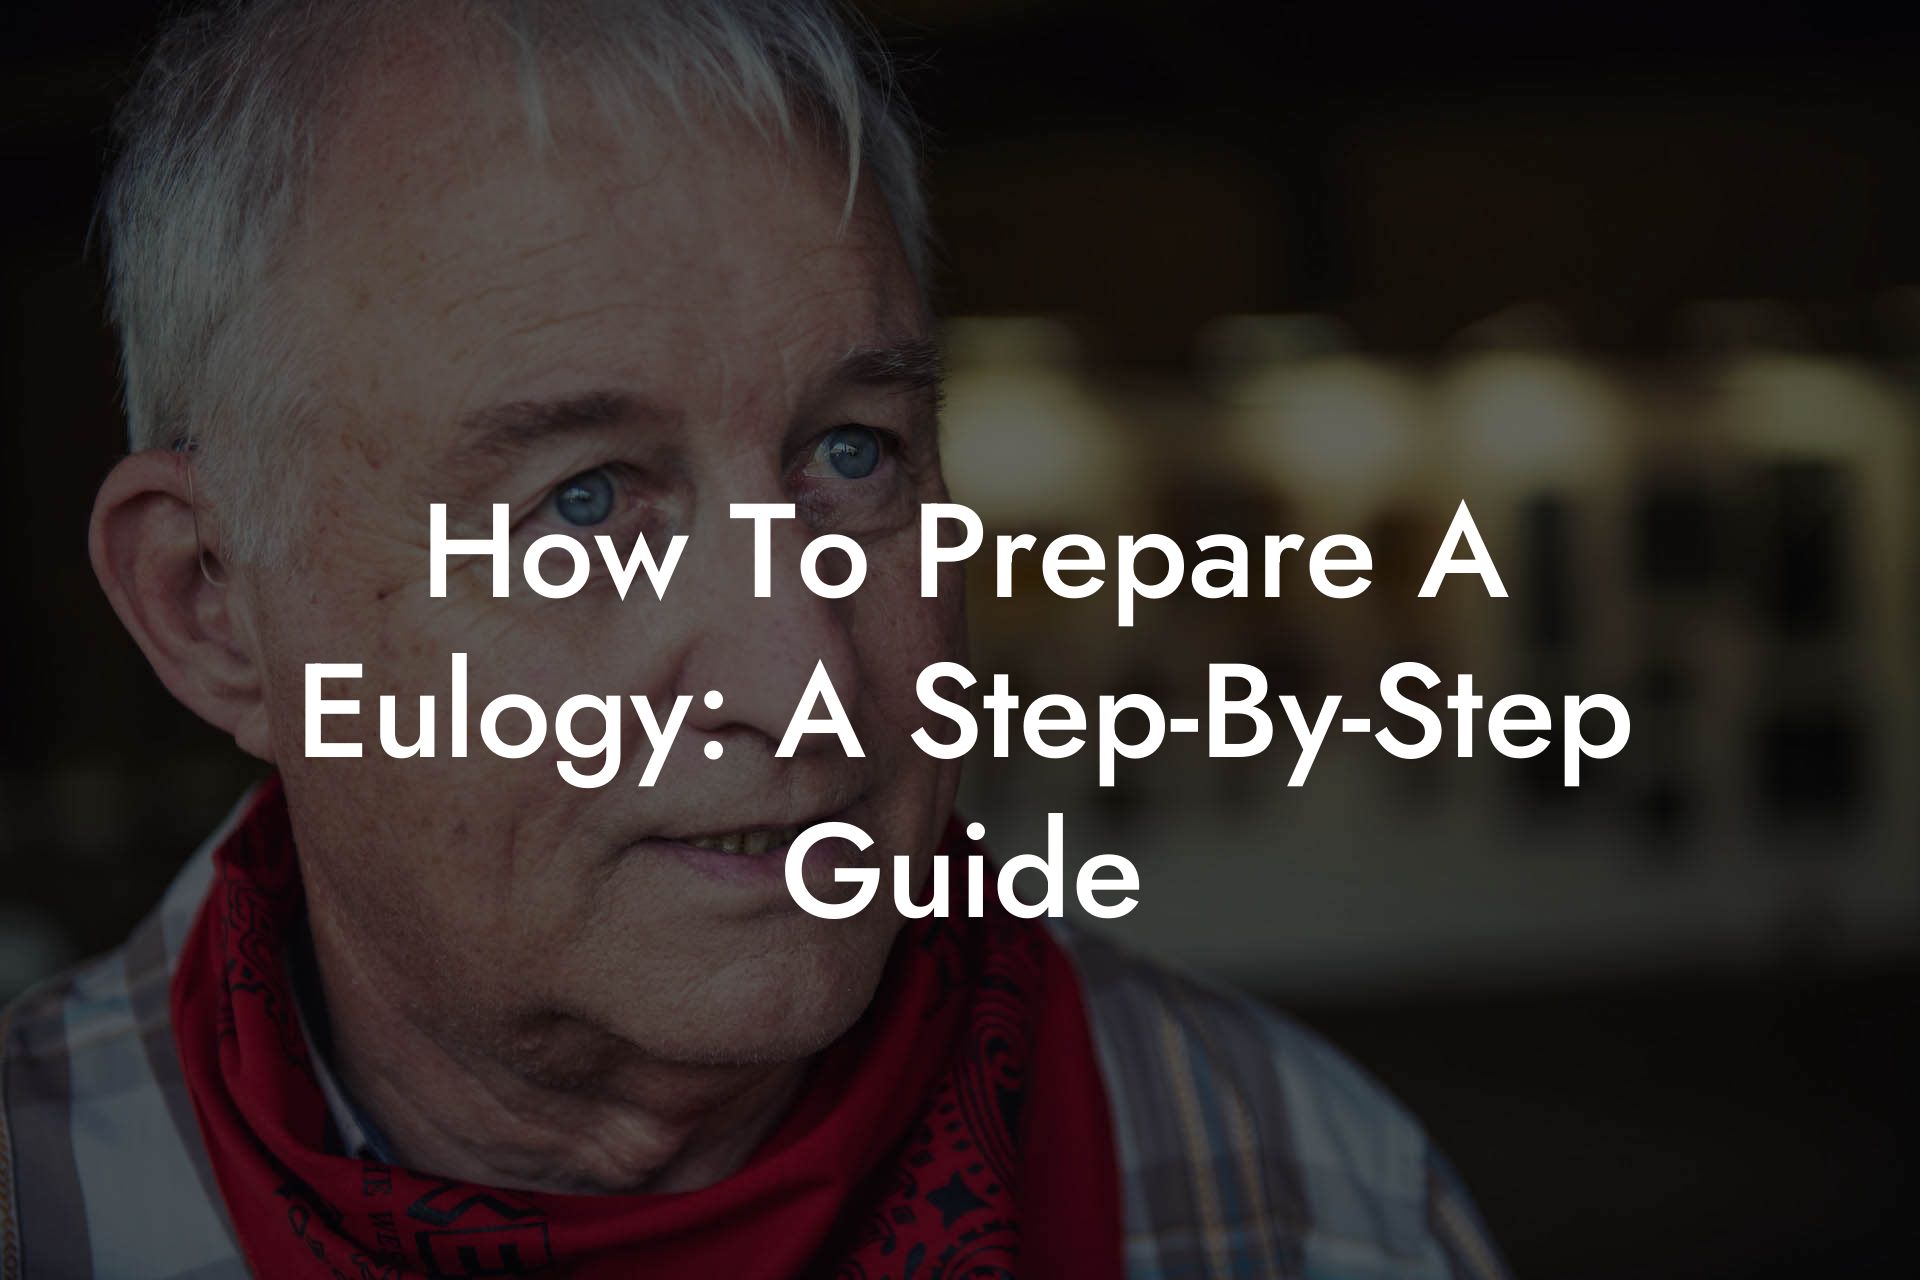 How To Prepare A Eulogy: A Step-By-Step Guide